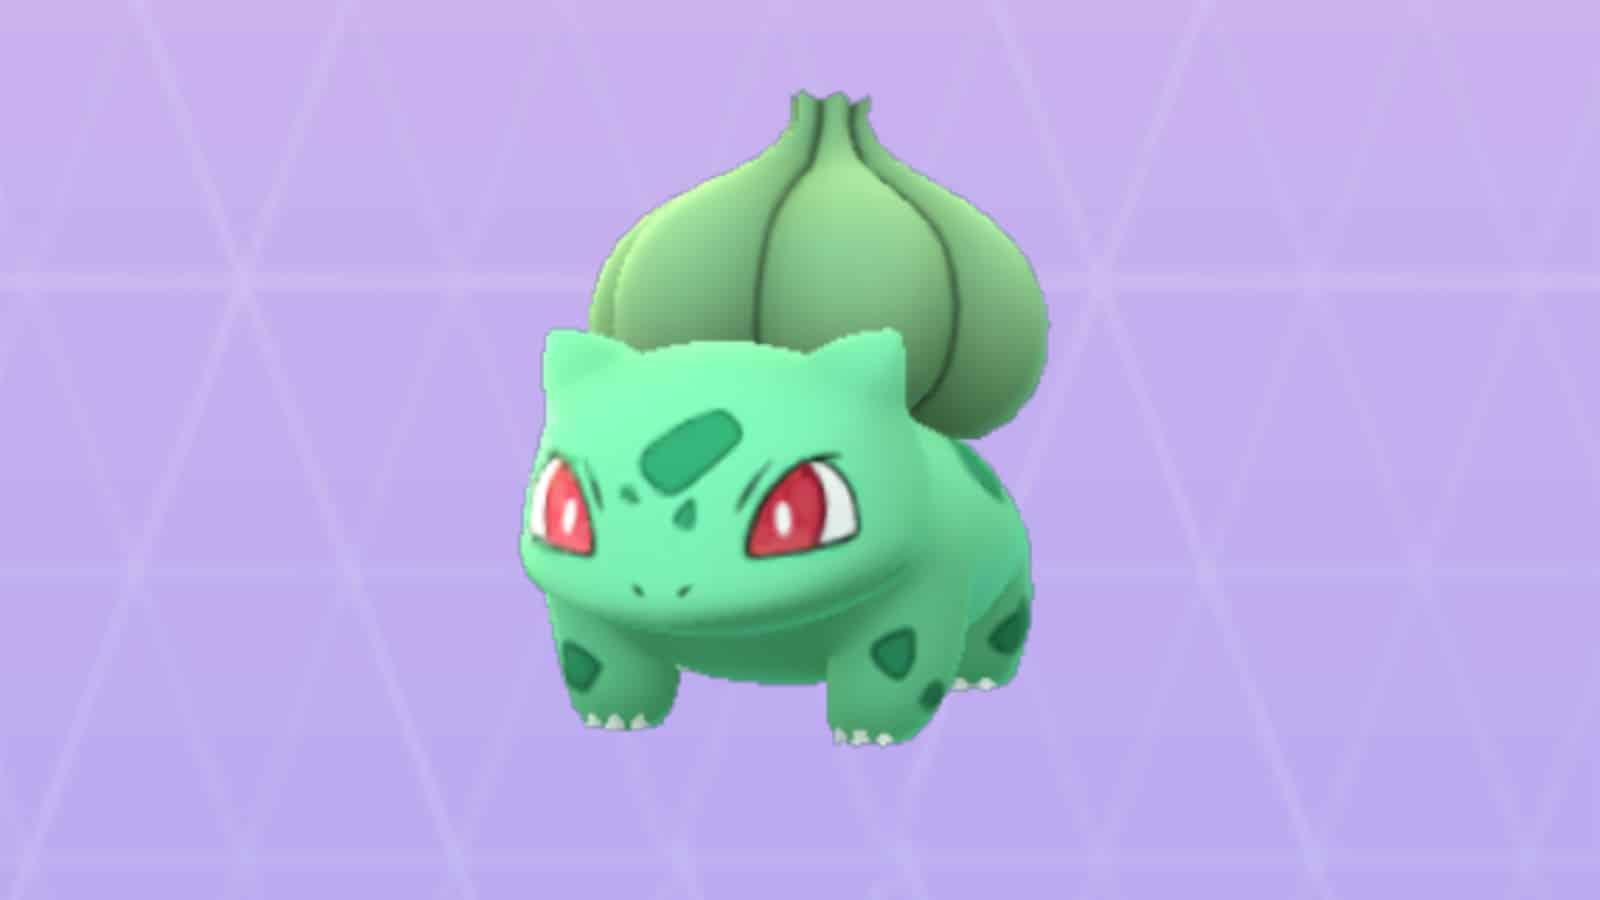 Bulbasaur appearing in Pokemon Go's COmmunity Day Classic